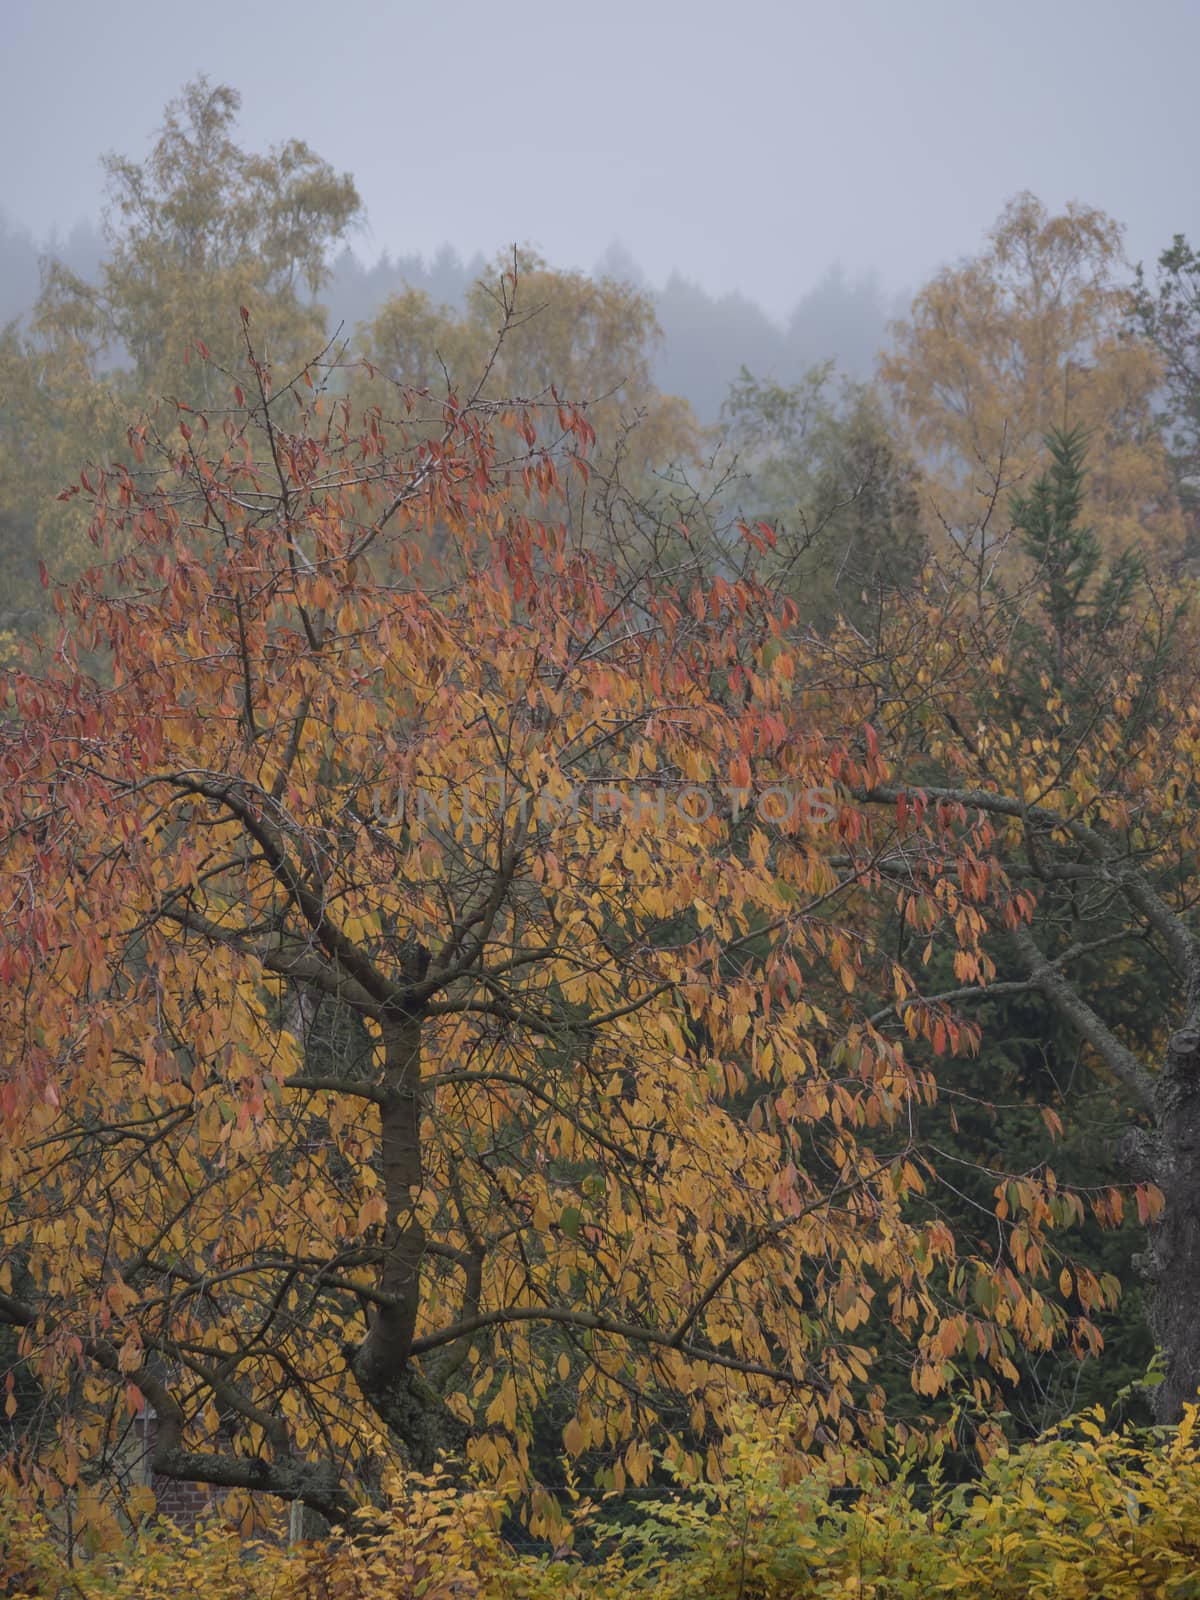 Vibrant Autumn Colours of the Leaves on Cherry Tree, deciduous trees and bush in moody foggy autumn day with mist background in a countryside.